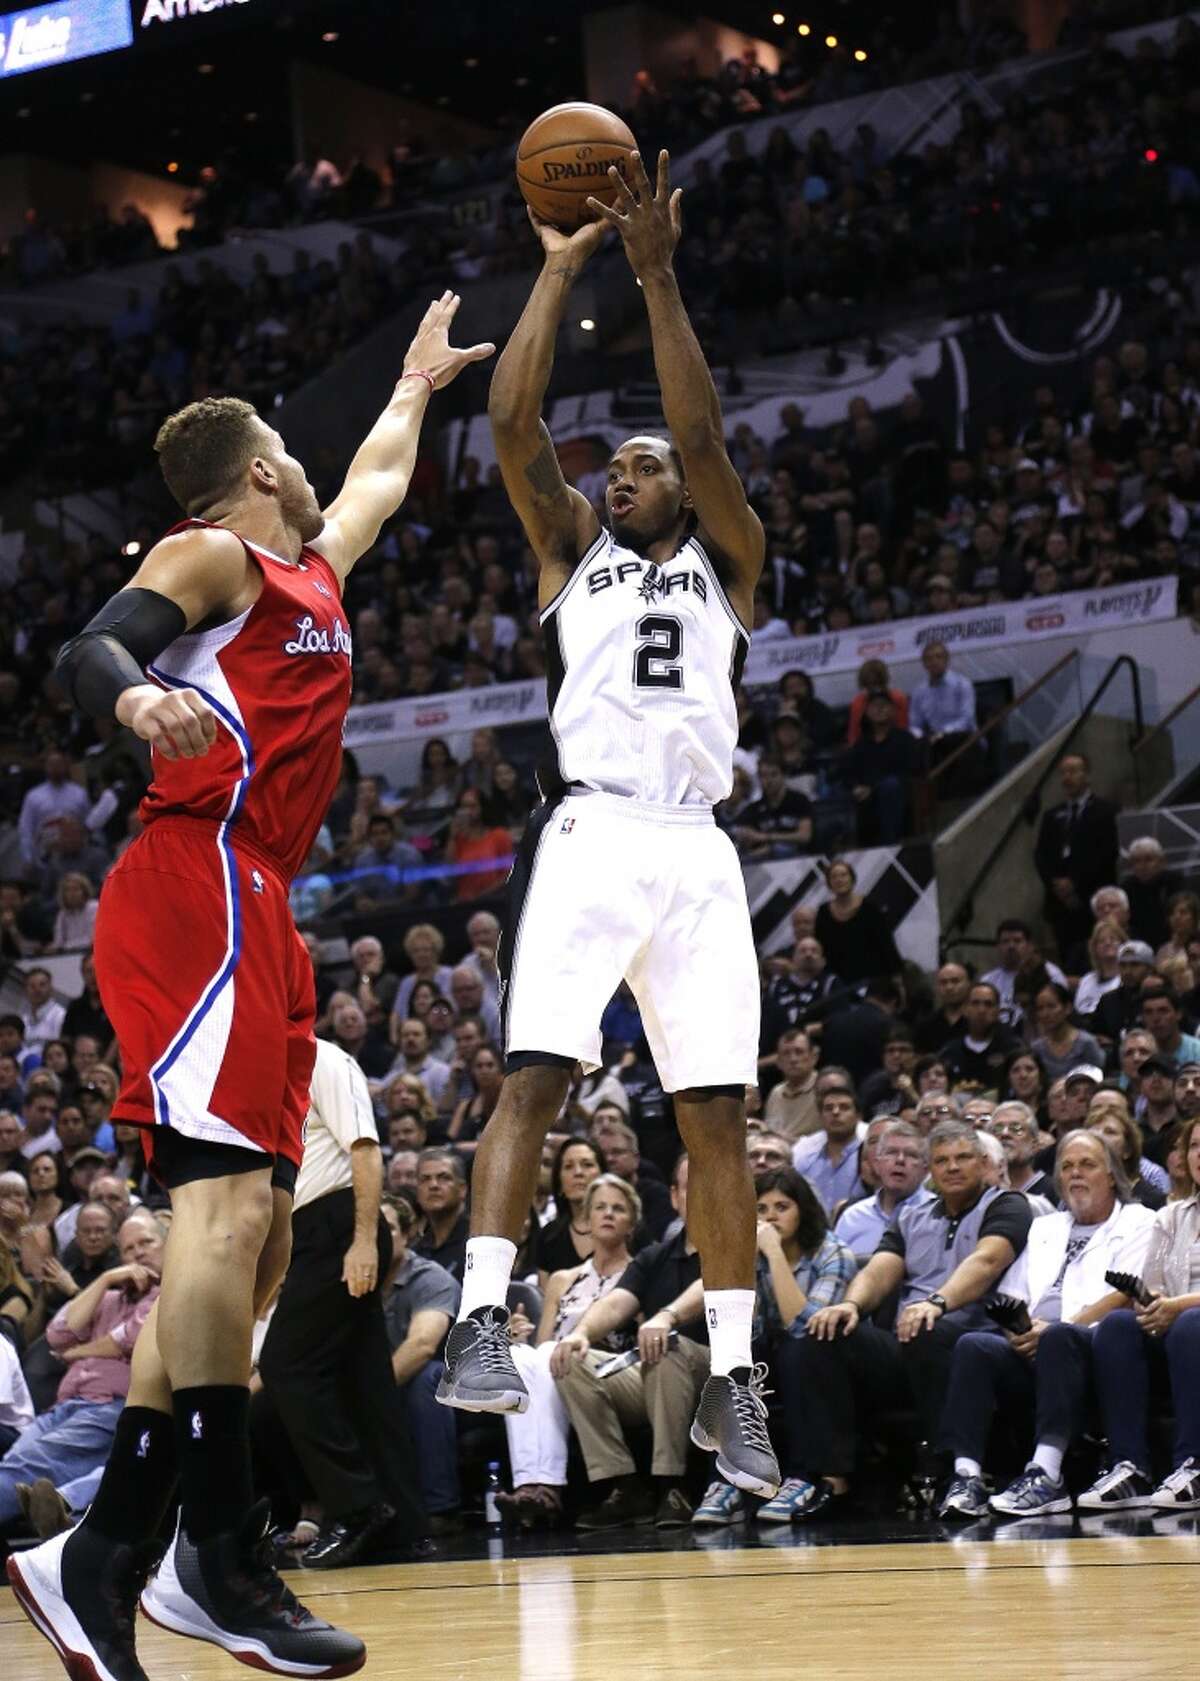 SAN ANTONIO, TX - APRIL 24: Kawhi Leonard #2 of the San Antonio Spurs shoots over Blake Griffin #32 of the Los Angeles Clippers in Game Three during the first round of the 2015 NBA Playoffs at the AT&T Center on April 24, 2015 in San Antonio, Texas. NOTE TO USER: User expressly acknowledges and agrees that, by downloading to the terms and conditions of the Getty Images License Agreement. (Photo by Chris Covatta/Getty Images)